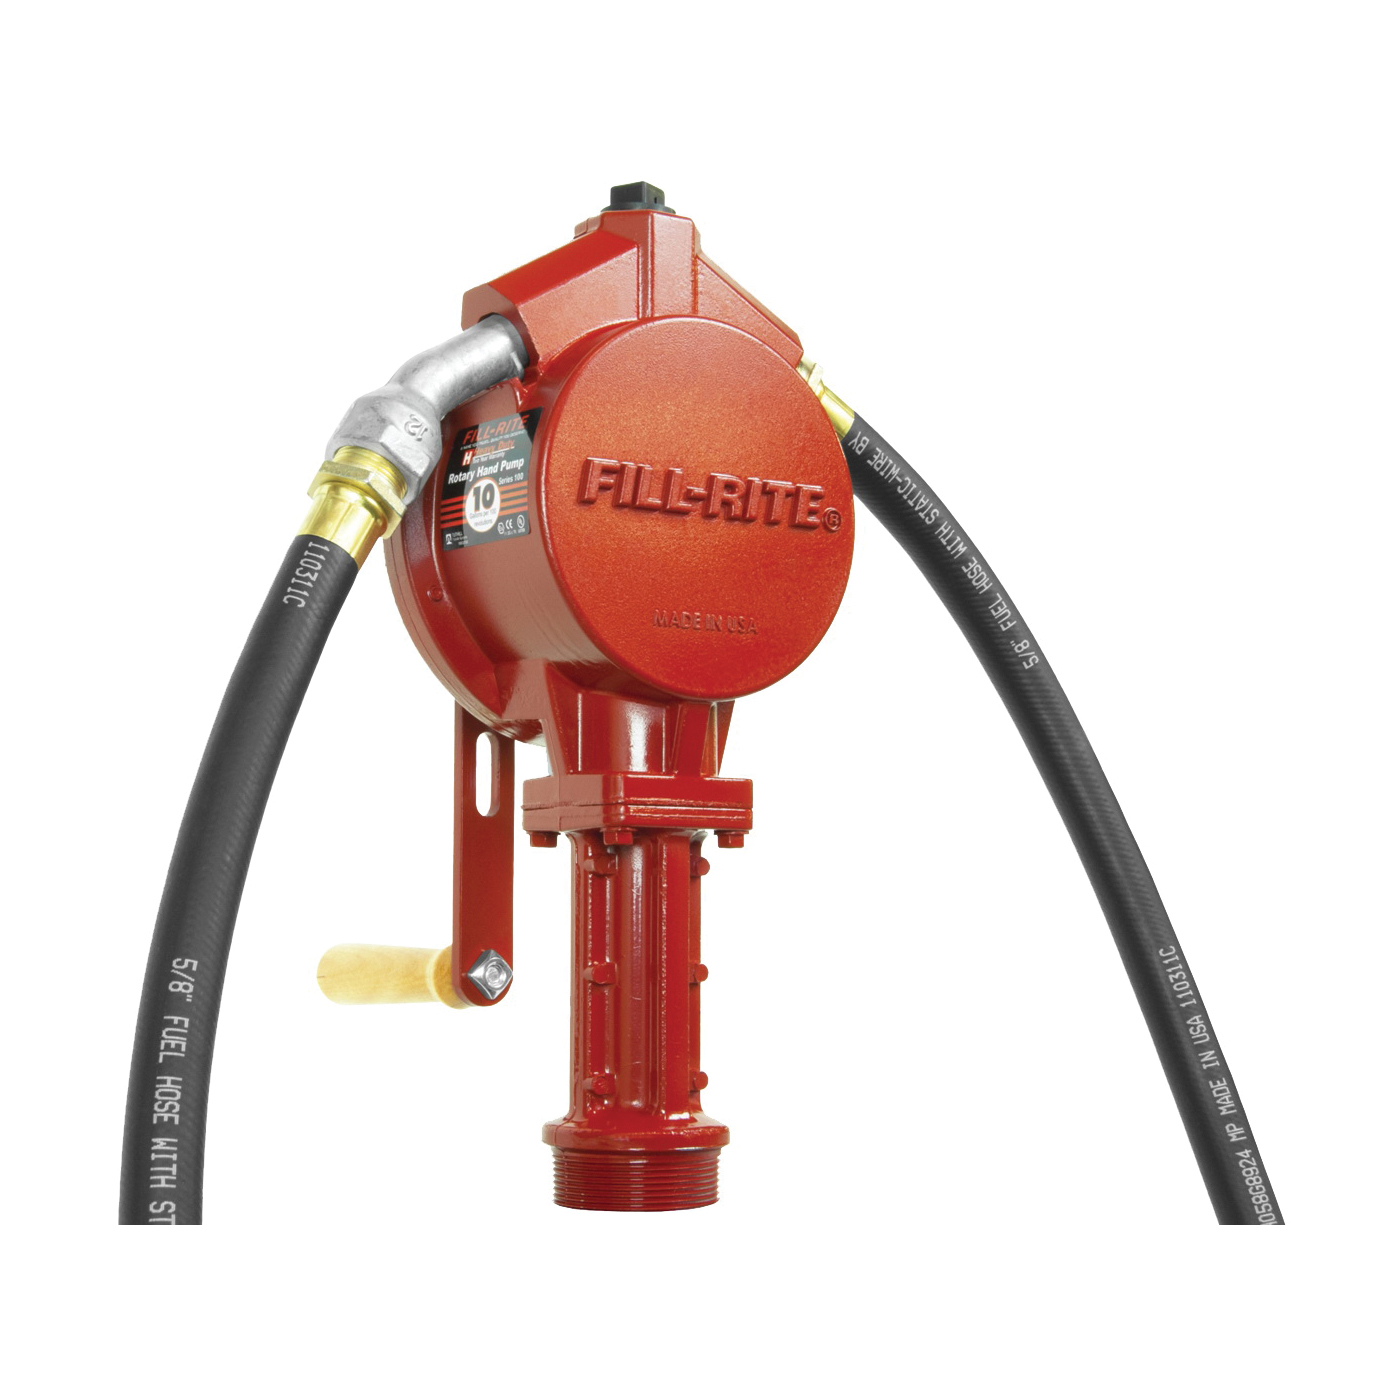 FR112 Hand Pump, 20 to 34-3/4 in L Suction Tube, 3/4 in Outlet, 10 gal/100 Revolution, Cast Aluminum